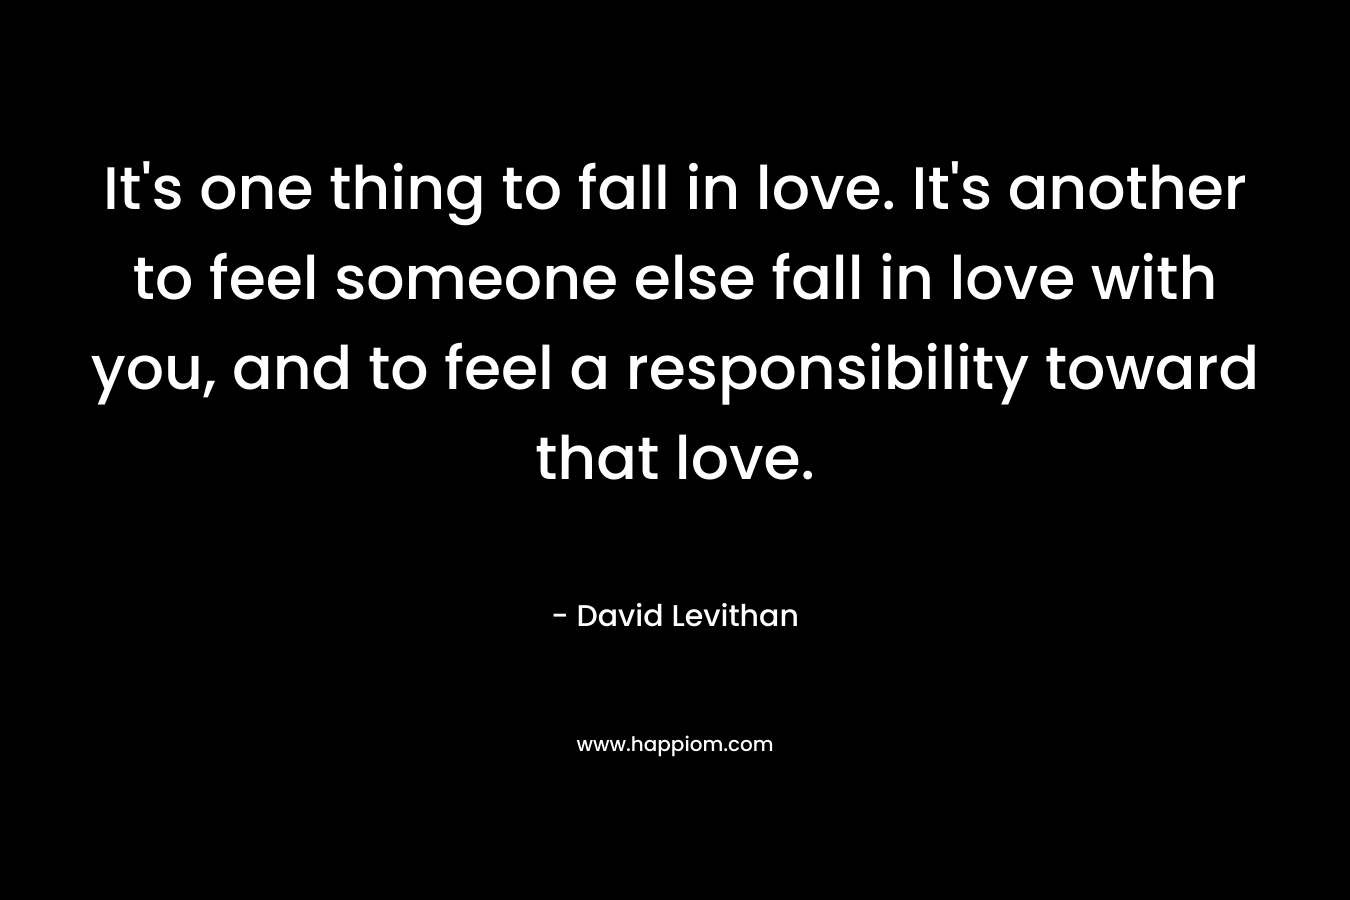 It's one thing to fall in love. It's another to feel someone else fall in love with you, and to feel a responsibility toward that love.